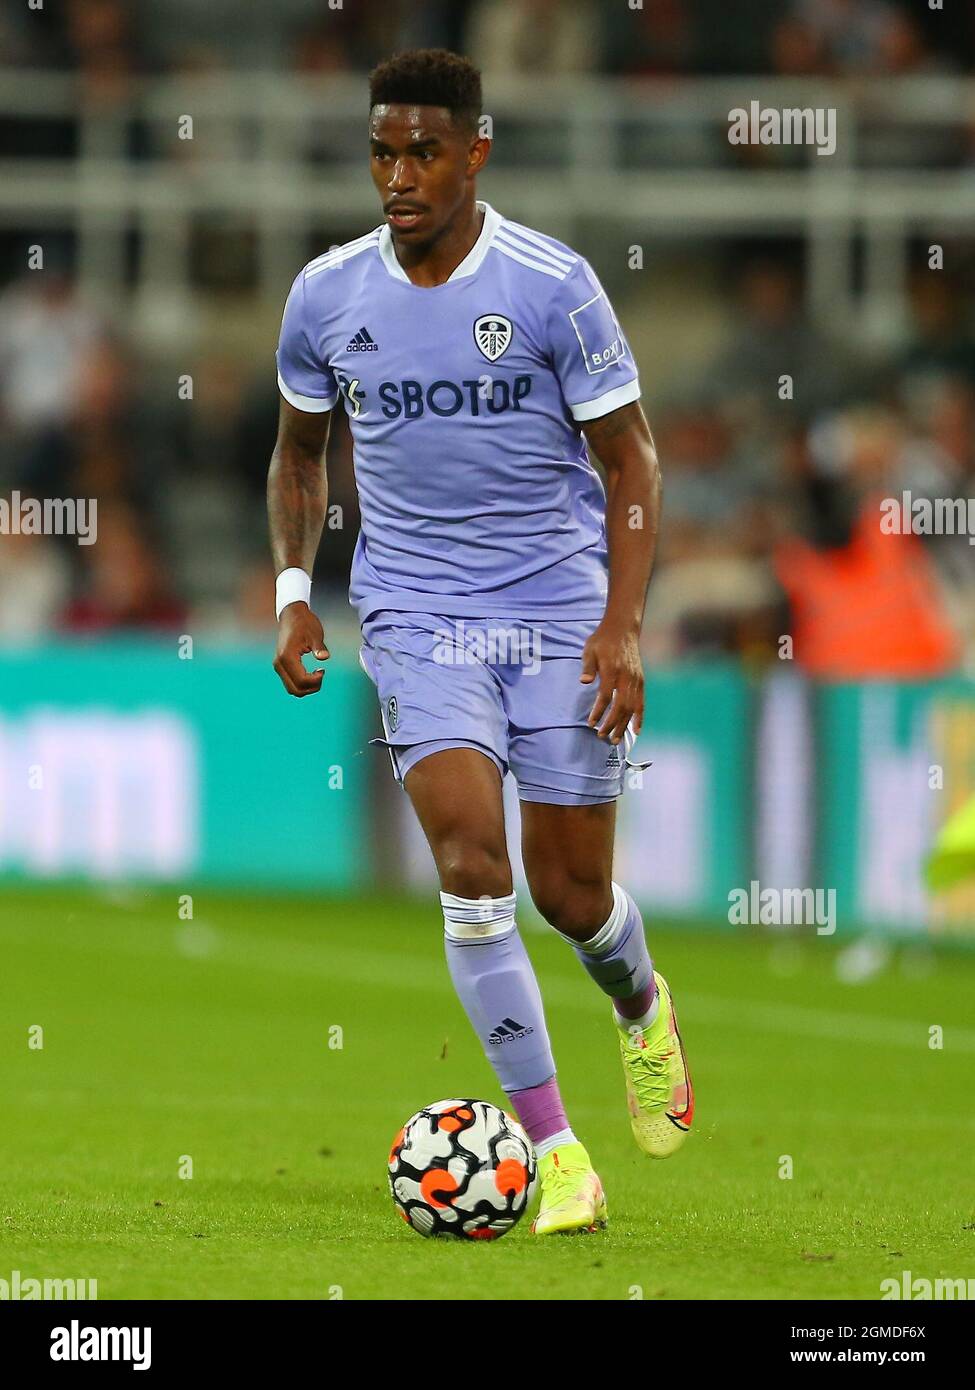 NEWCASTLE UPON TYNE, ENGLAND - SEPTEMBER 17: Junior Firpo of Leeds United during the Premier League match between Newcastle United and Leeds United at St. James Park on September 17, 2021 in Newcastle upon Tyne, England. (Photo by MB Media) Stock Photo